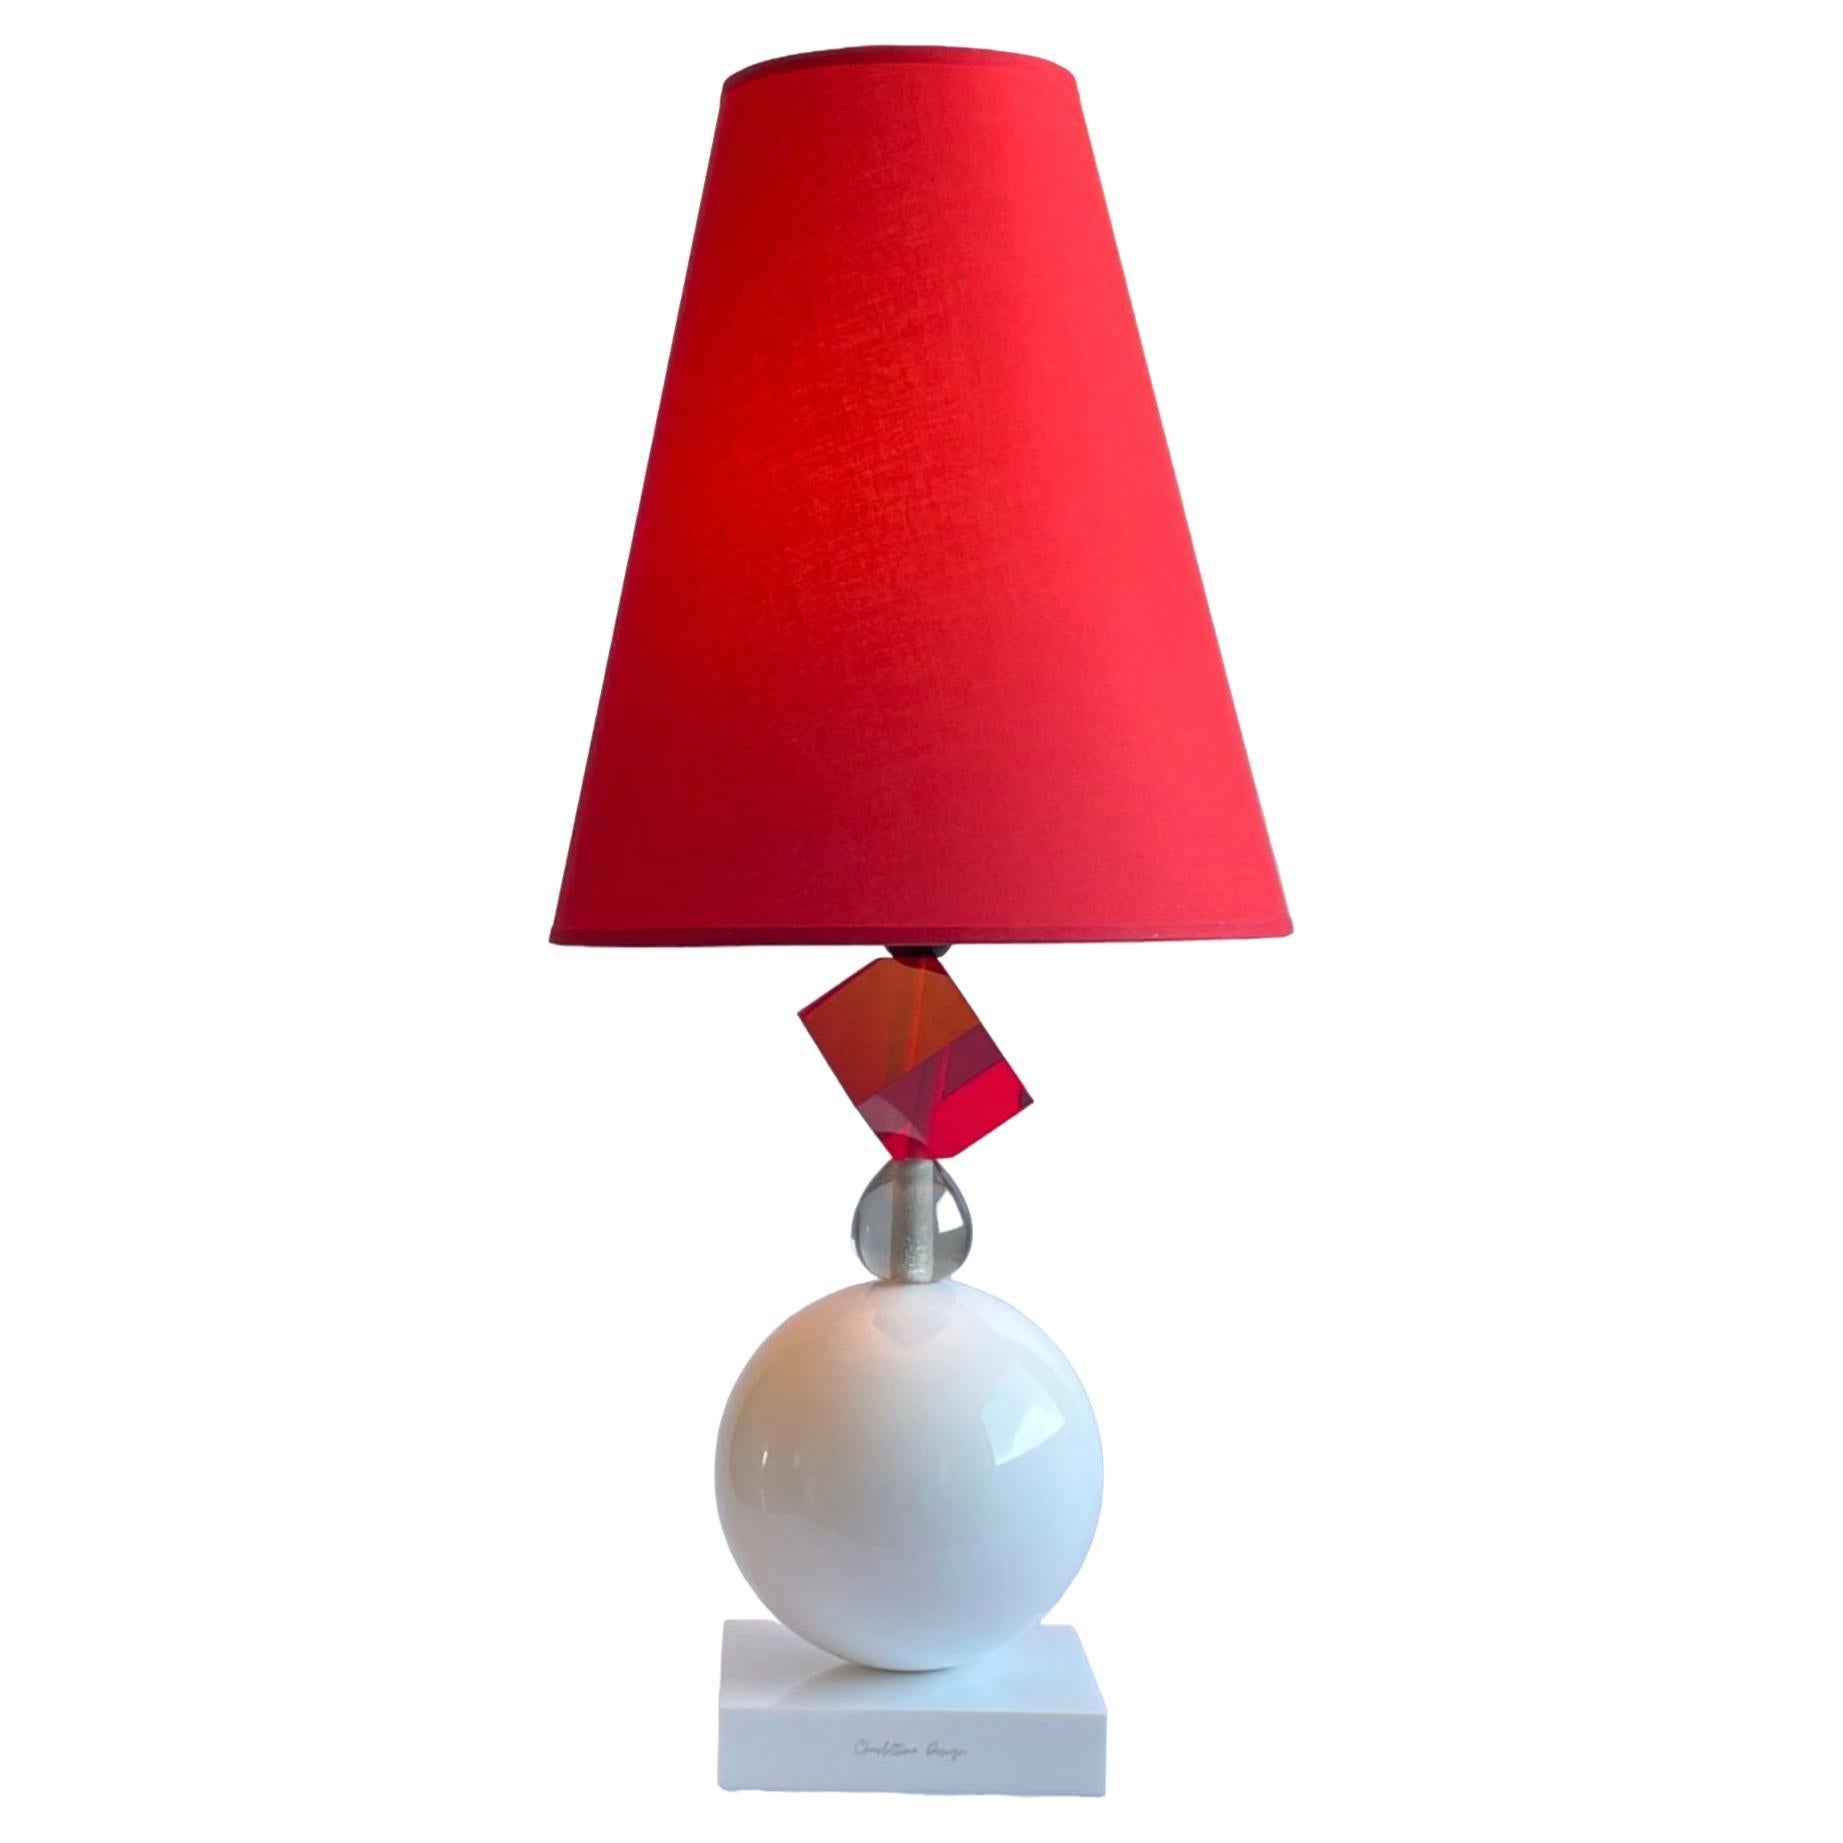 100% Italian resin table lamp in design and manufacture For Sale